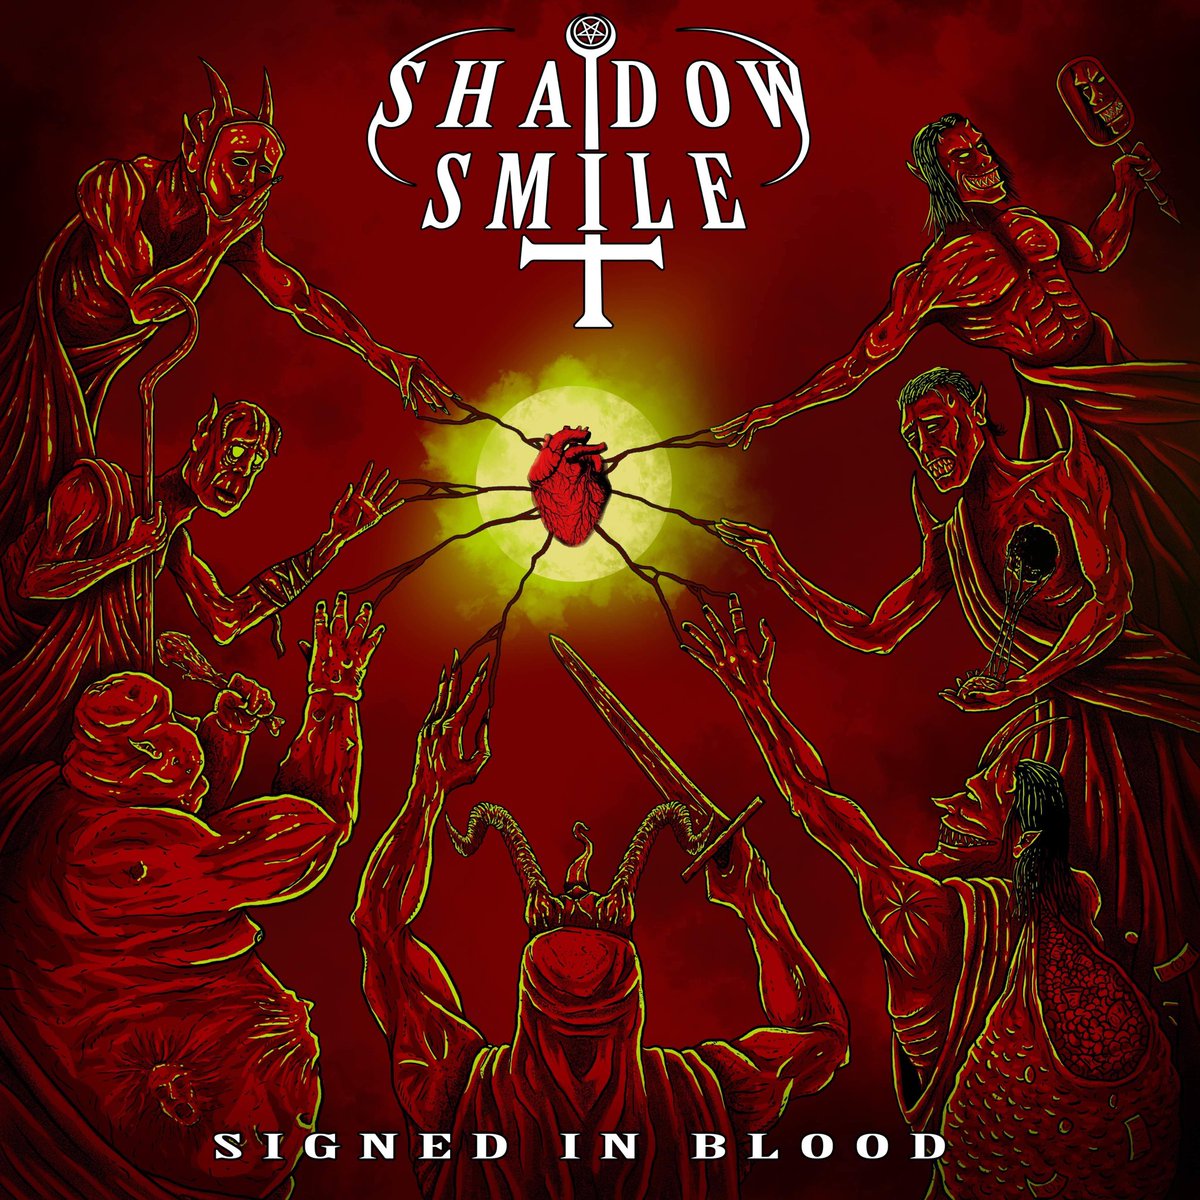 OUT NOW!!! @shadowsmile666 'SIGNED IN BLOOD' DEBUT ALBUM STREAM: open.spotify.com/album/647vzvwk… #shadowsmile #signedinblood #debutalbum #debut #album #music #newmusic #newmusicalert #newmusicfriday #newmusic2023 #newmusicrelease #metal #metalband #band #outnow #streamnow #musicians